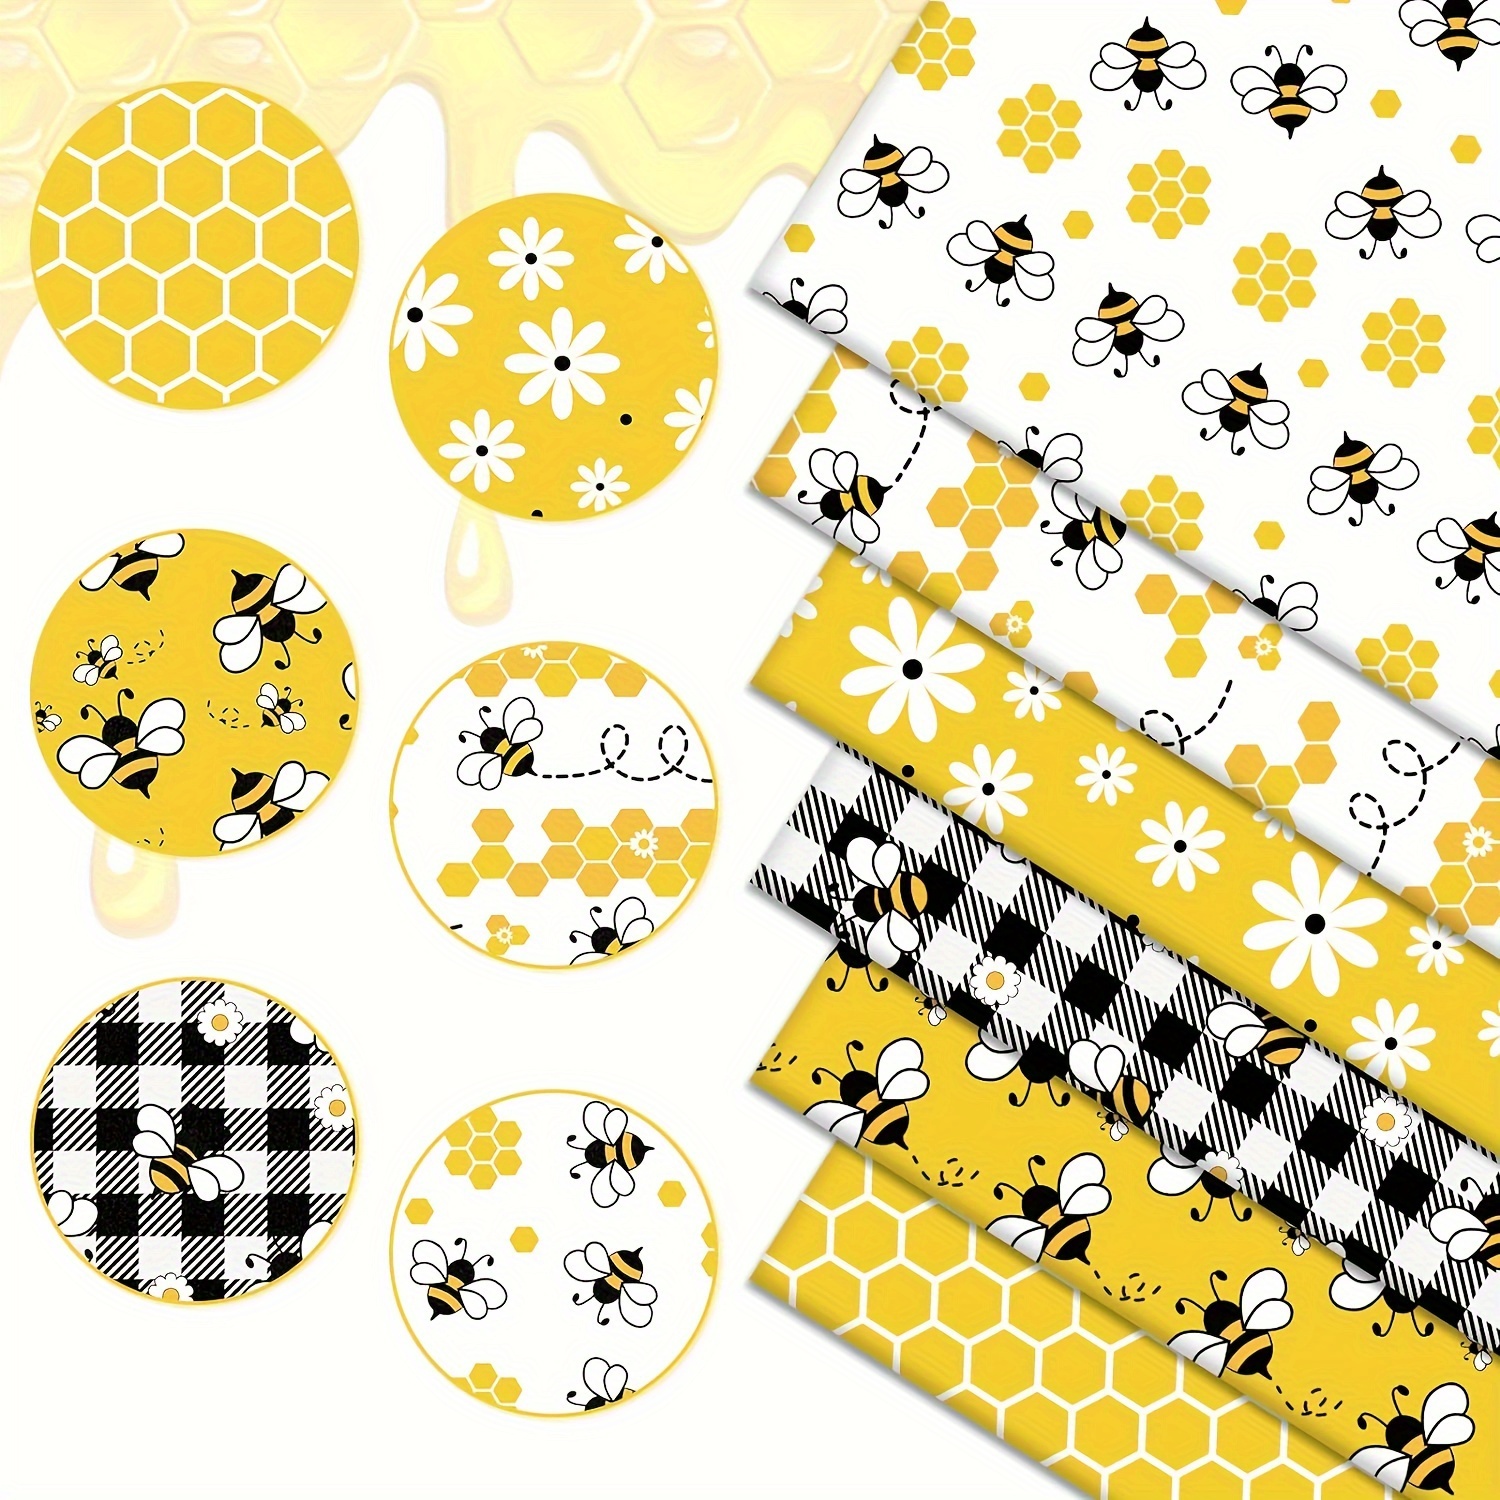 

6-piece Polyester Fabric Bundle 19.7x17.7" - Thick, Pre-cut Quilting Squares With Bee & Daisy Designs For Diy Crafts And Decorations